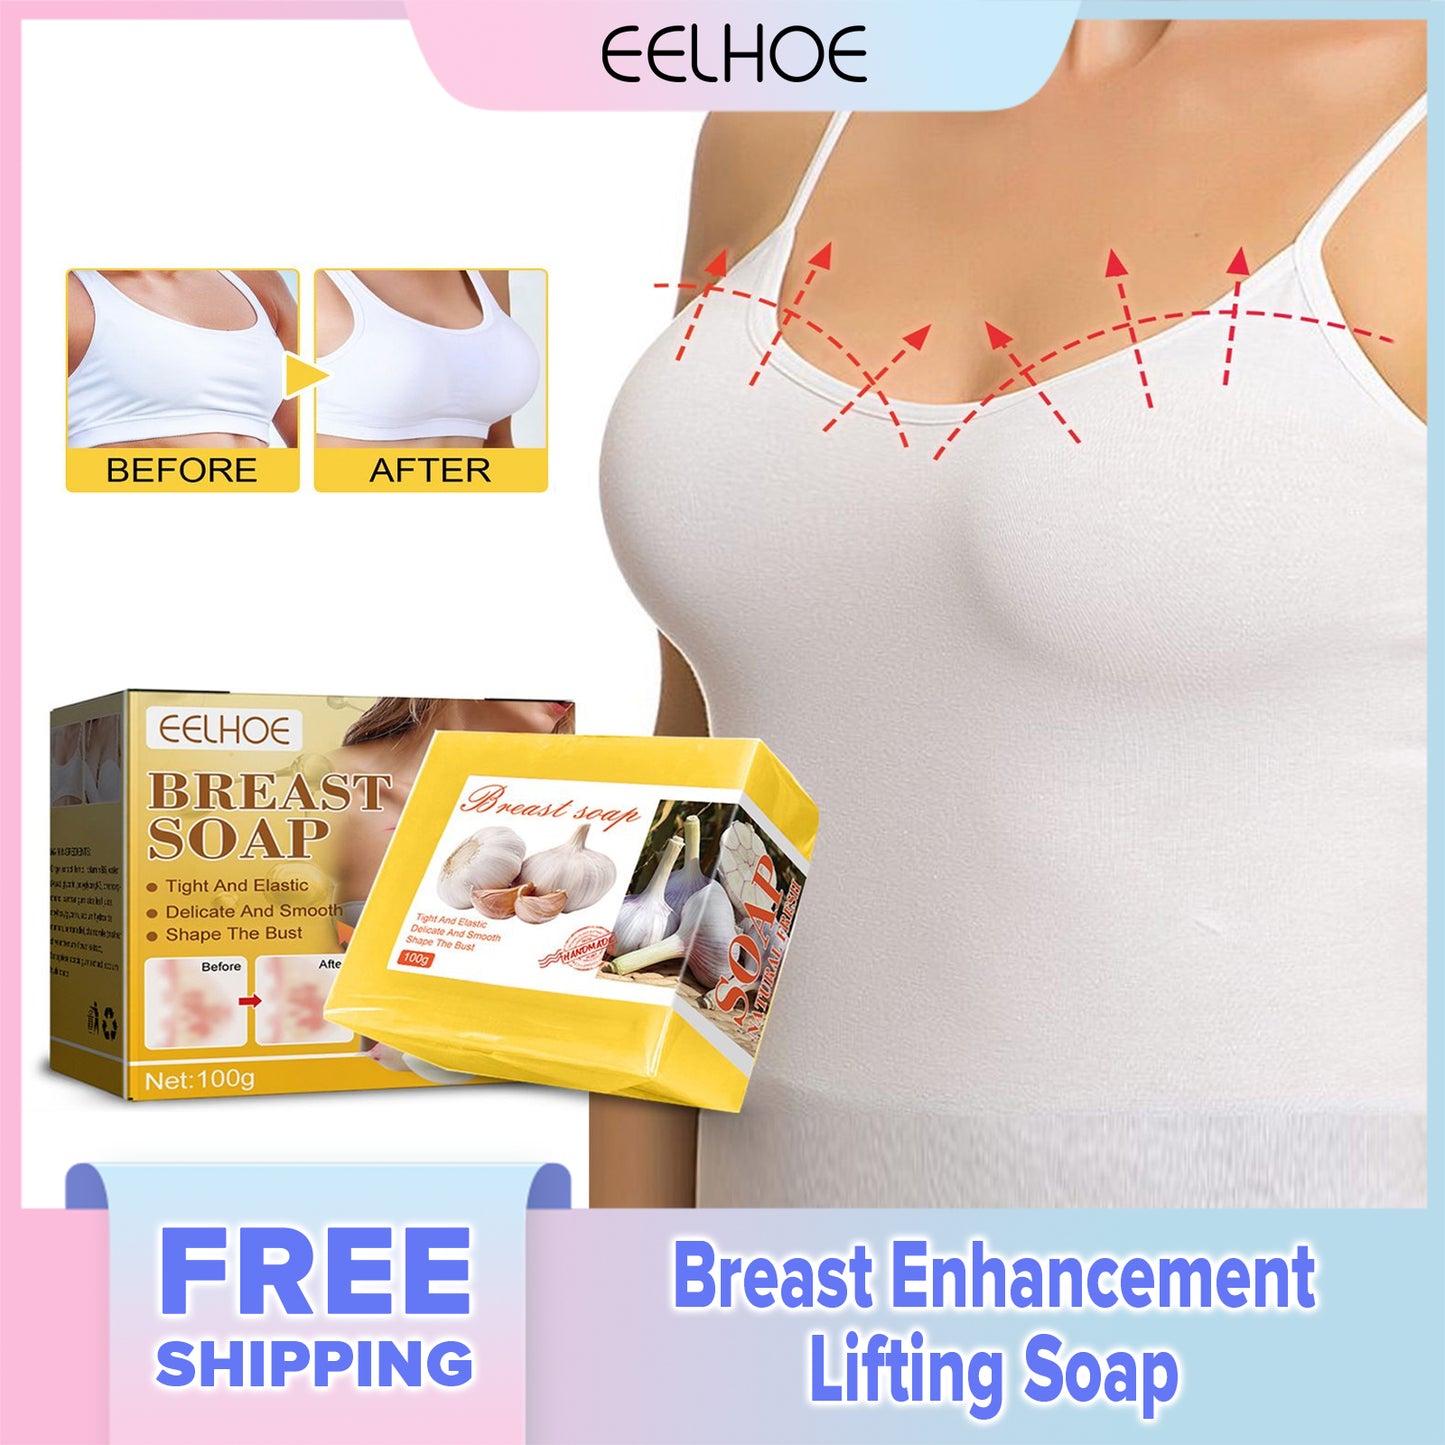 EELHOE Breast Enhancement Lifting Soap Breast Enlarge Firming Increase Elasticity Enhancer Breast Soap for Women Breast Care(100g)